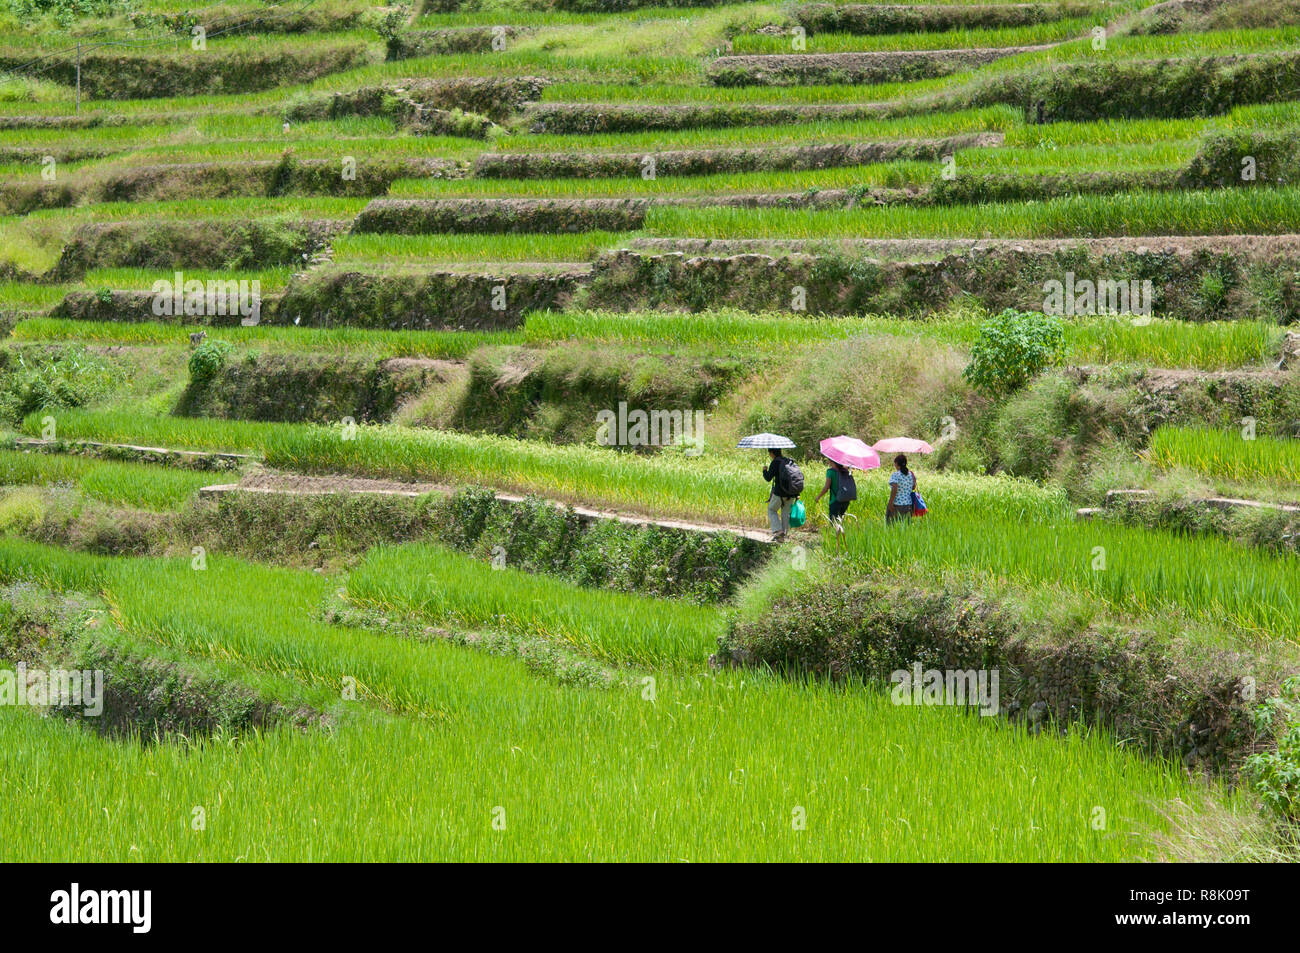 People walking with umbrellas at Maligcong Rice Terraces, Bontoc, Mountain Province, Philippines, Asia Stock Photo